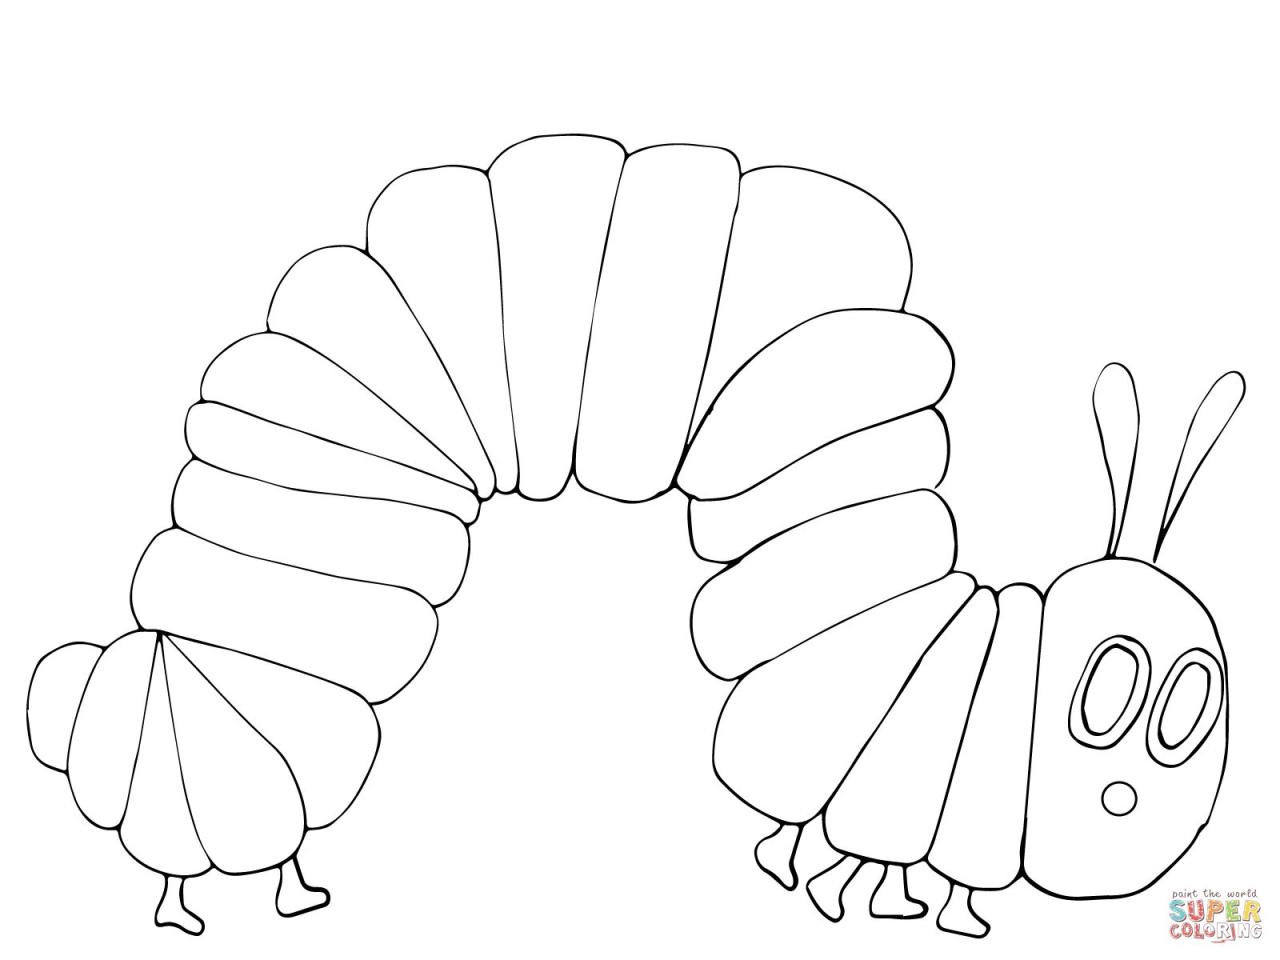 Printable The Very Hungry Caterpillar Coloring Pages